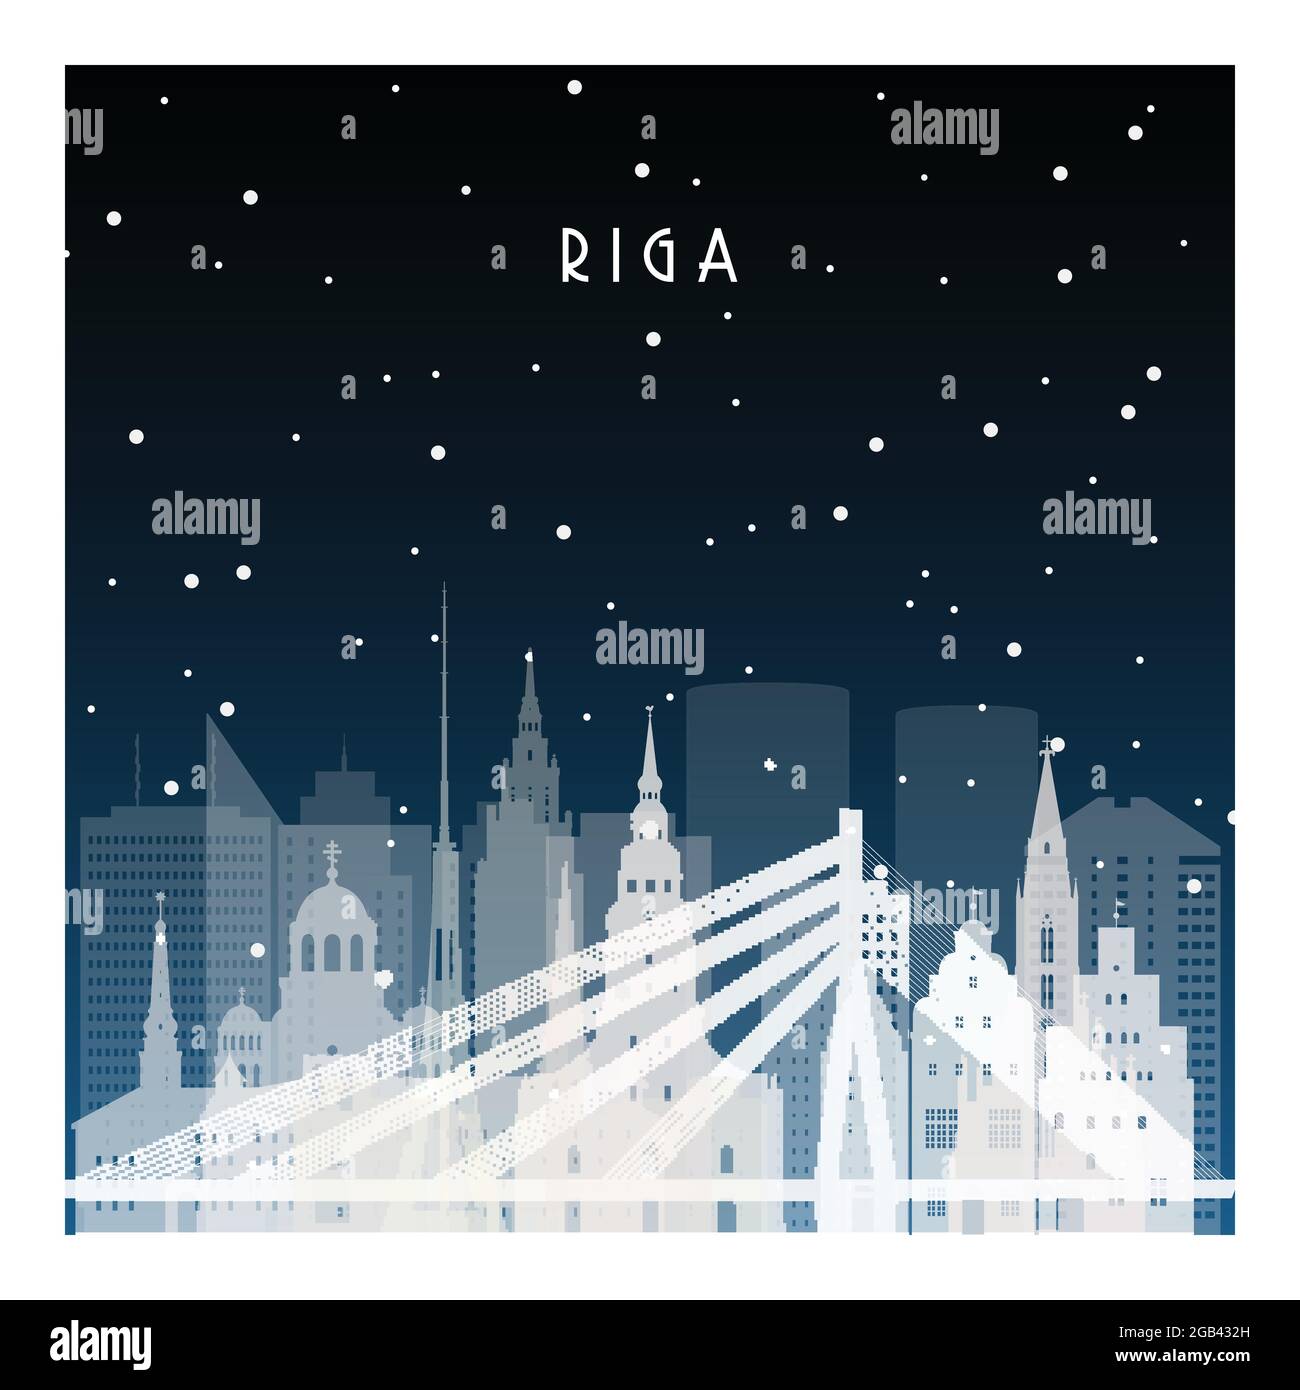 Winter night in Riga. Night city in flat style for banner, poster, illustration, background. Stock Vector